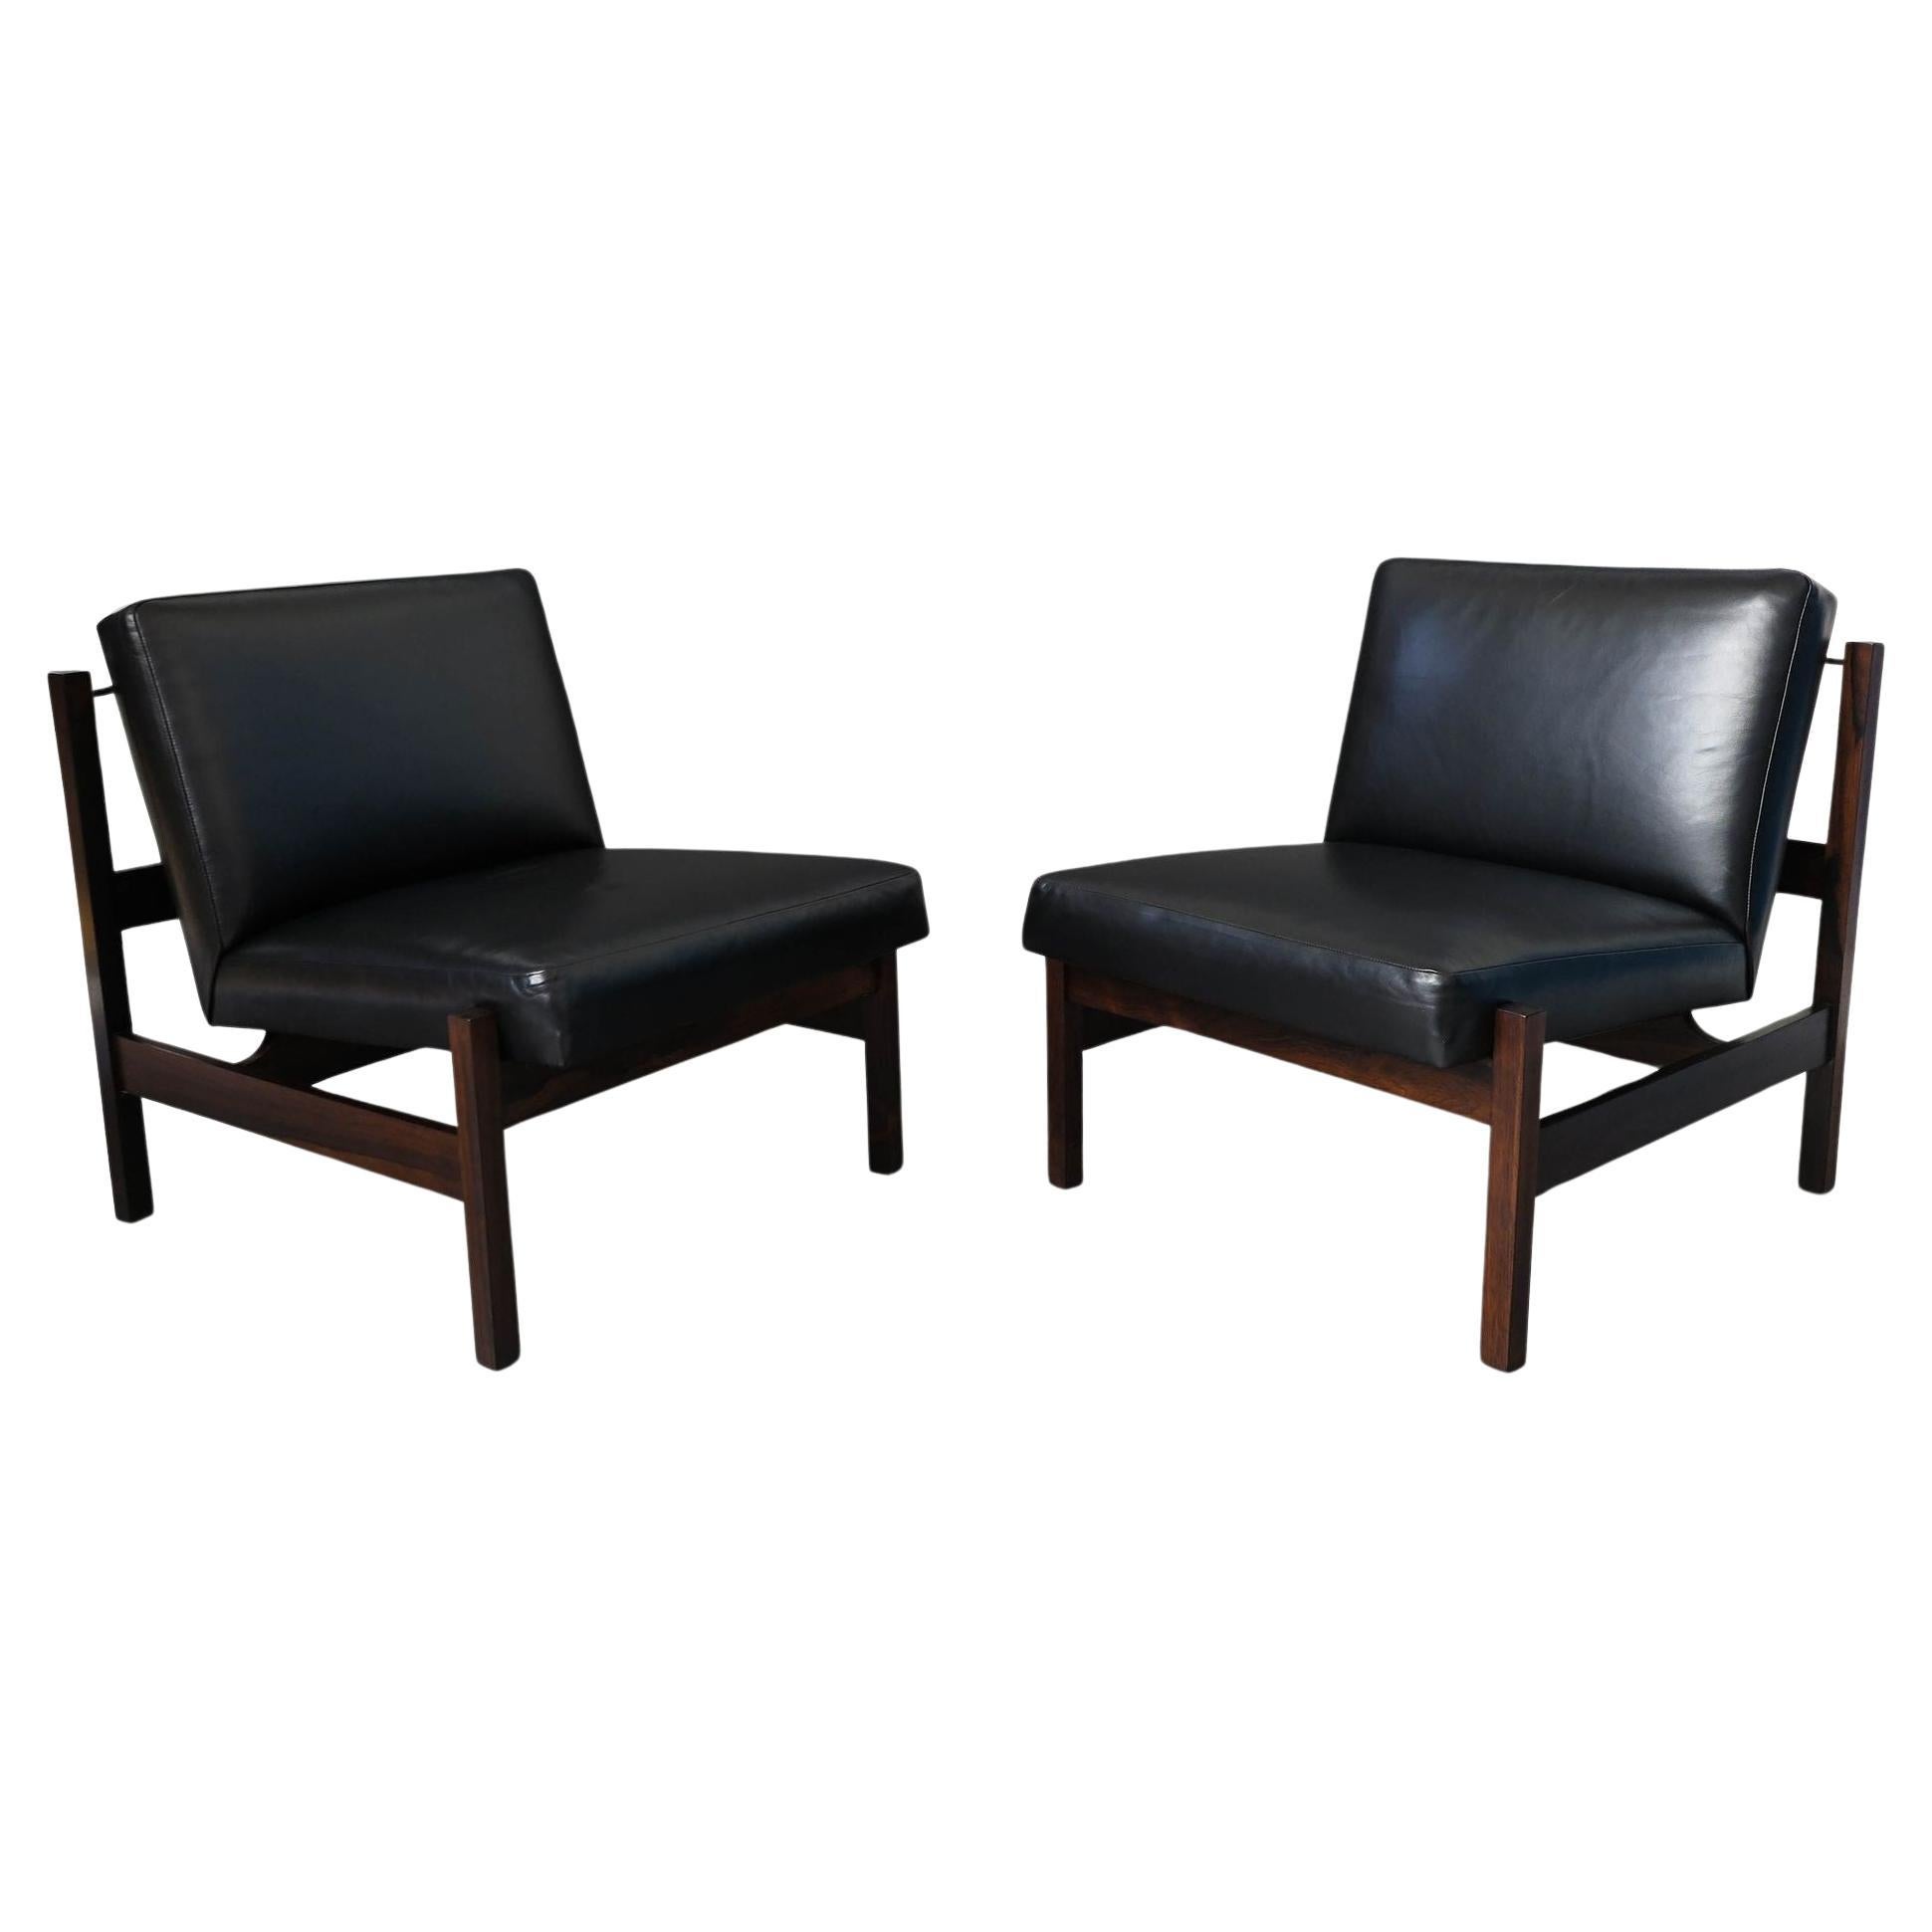 Forma Brazil Rosewood Lounge Chairs in Black Leather